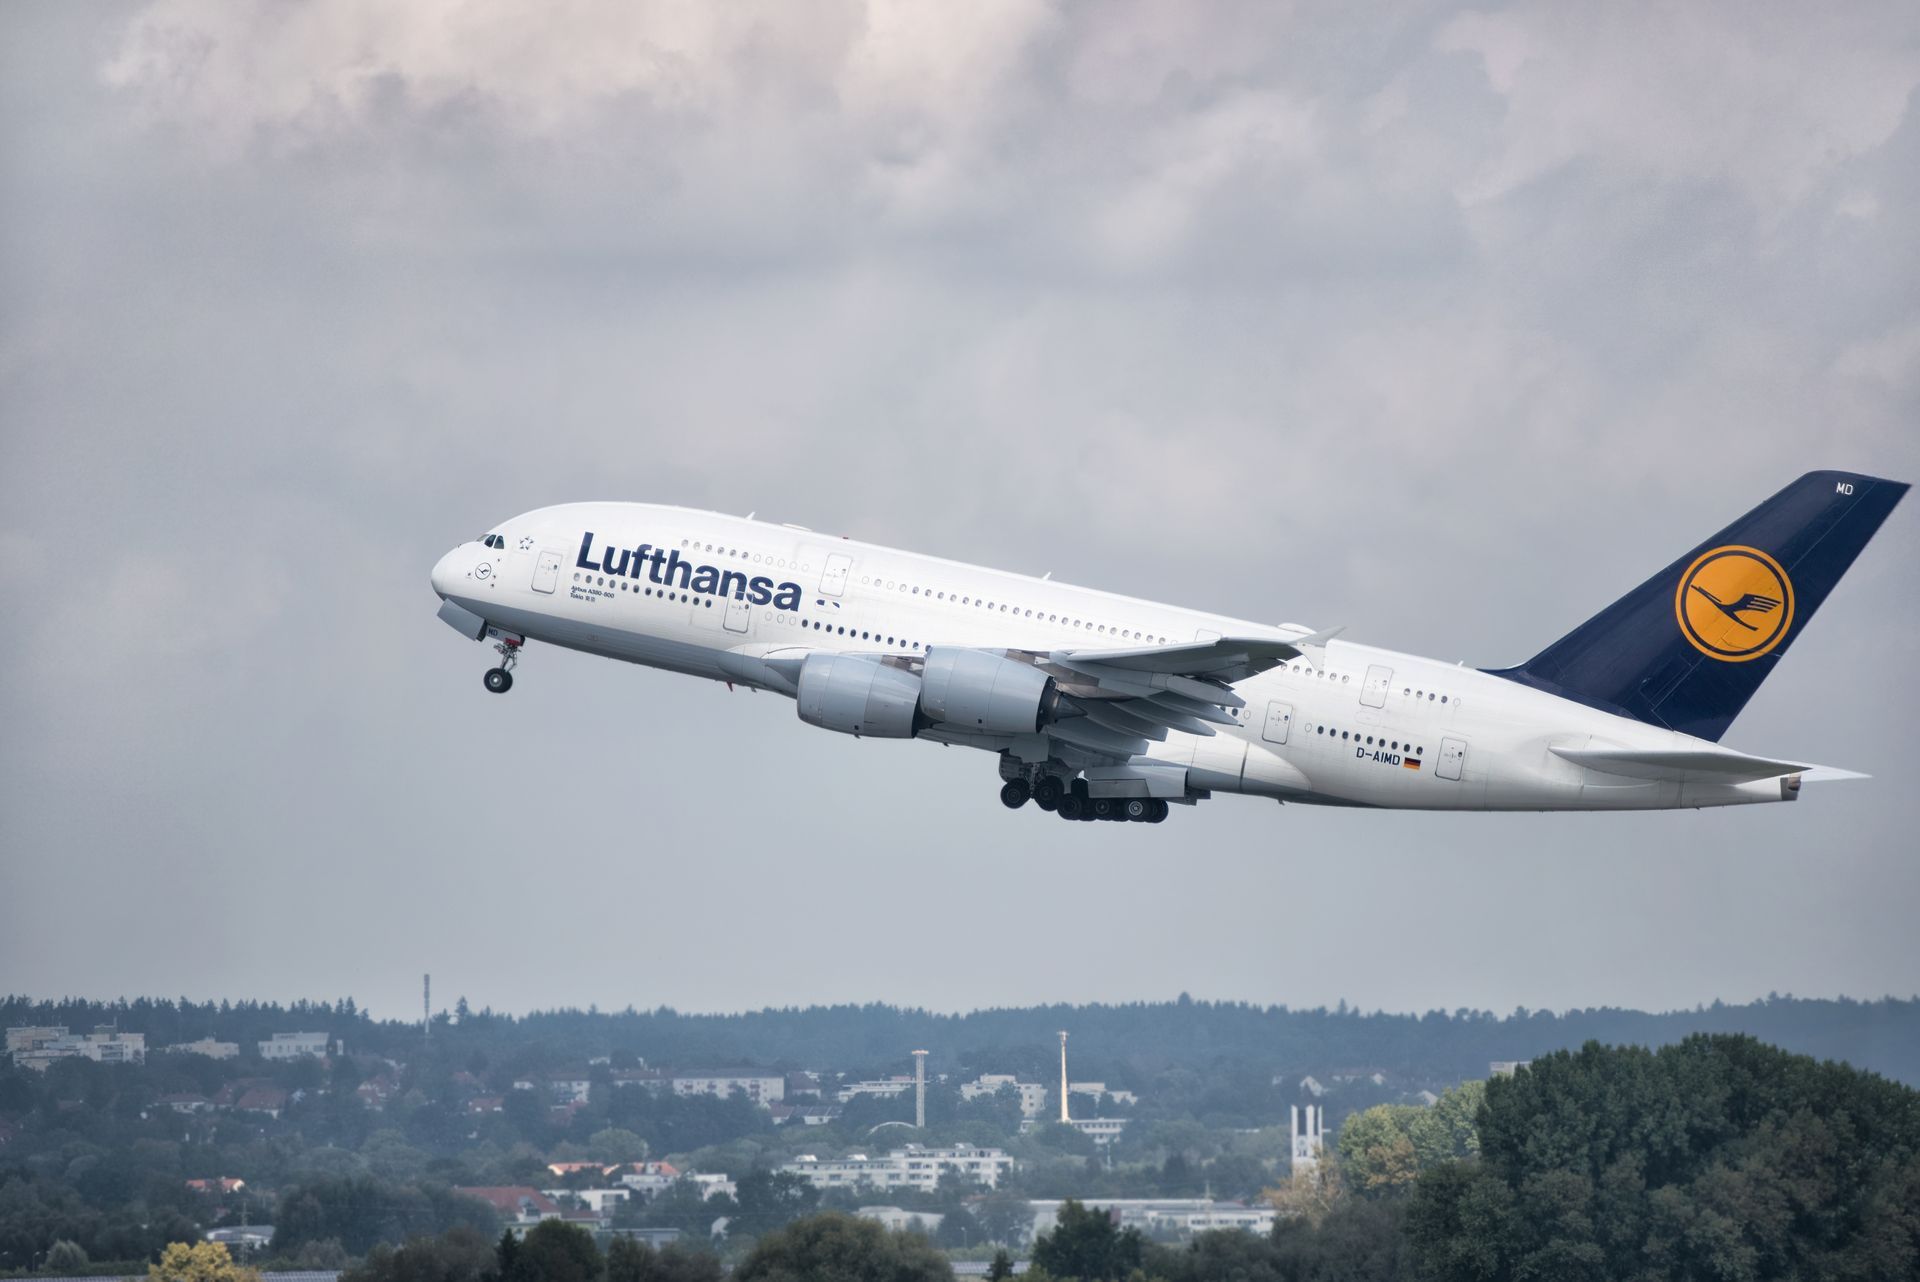 A lufthansa jumbo jet is taking off from an airport runway.